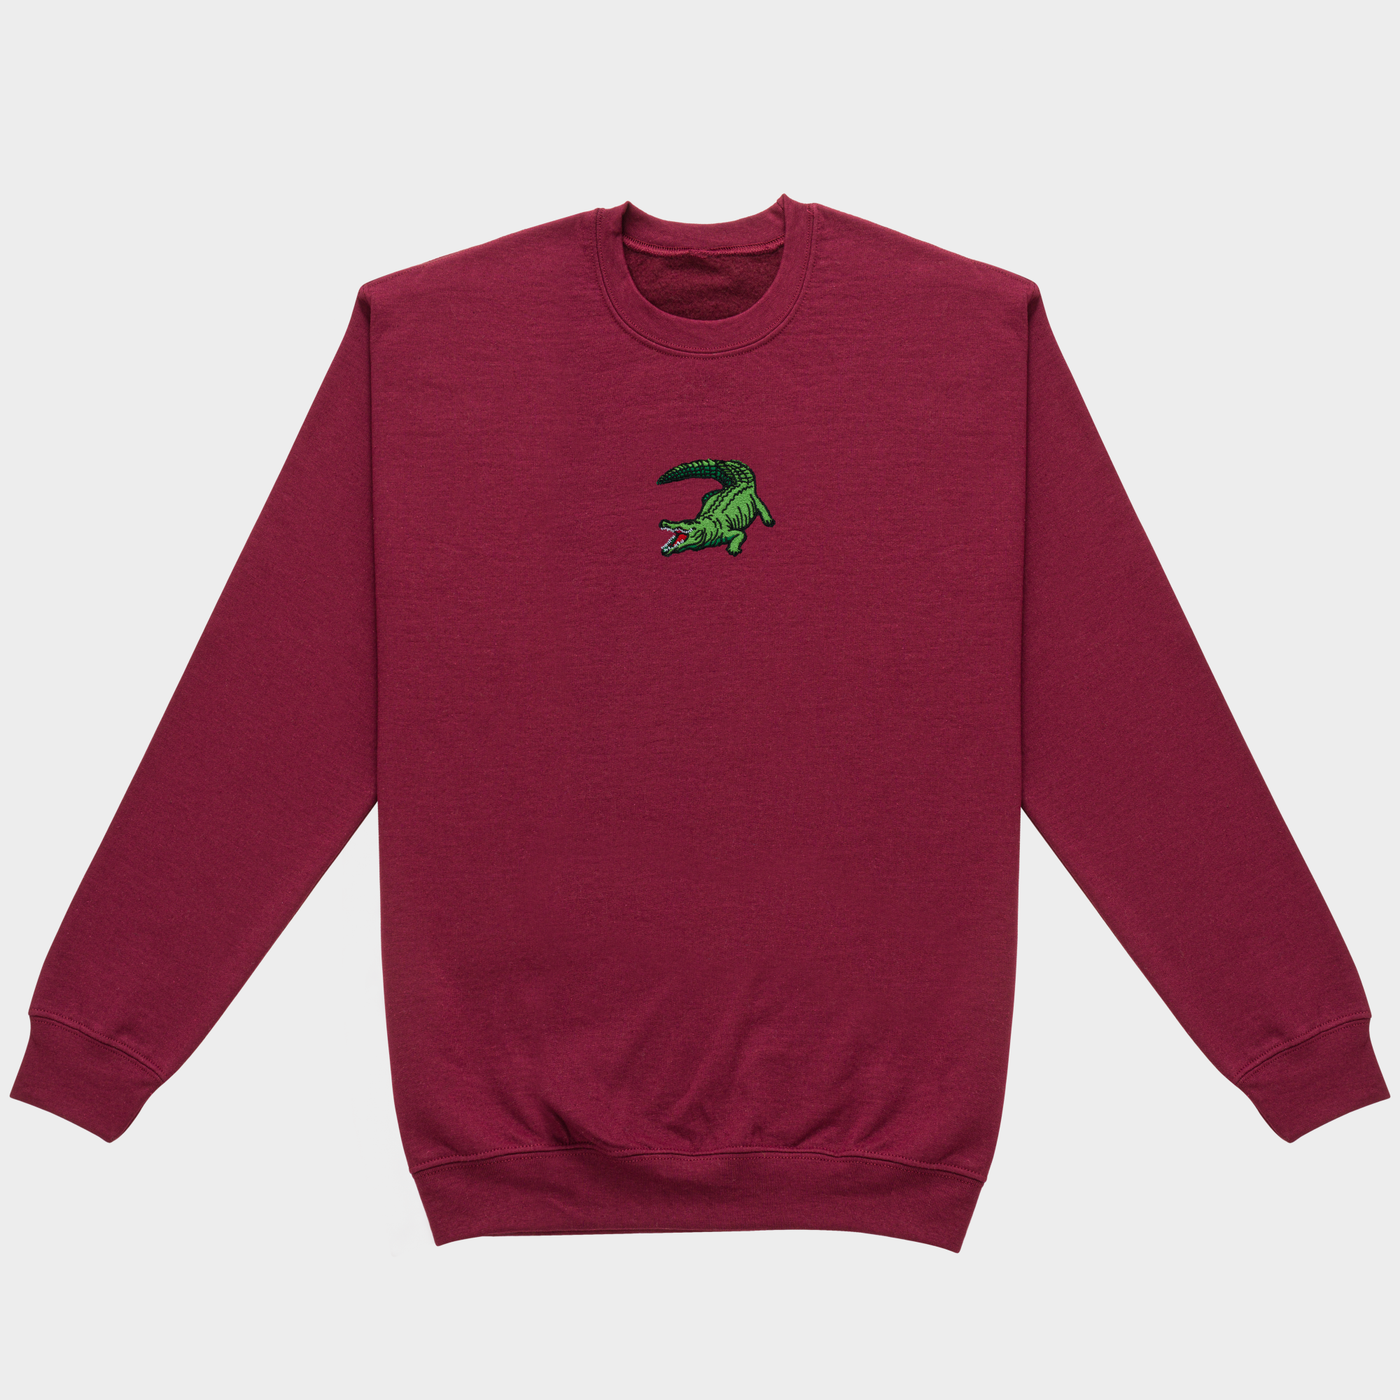 Bobby's Planet Women's Embroidered Saltwater Crocodile Sweatshirt from Australia Down Under Animals Collection in Maroon Color#color_maroon